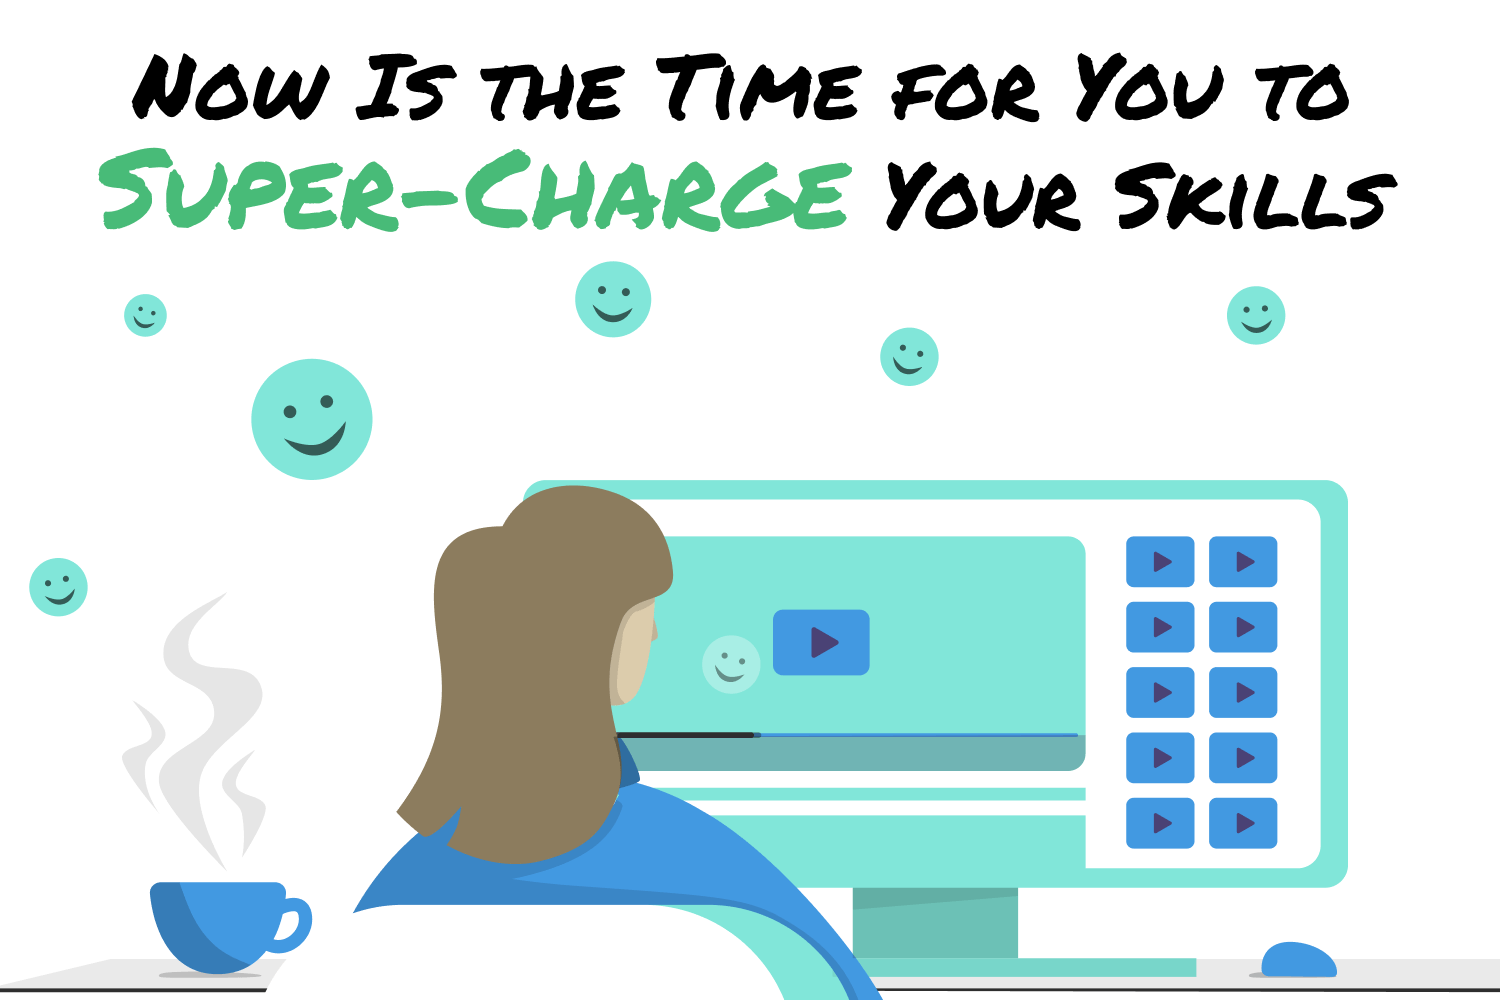 Now Is the Time for You to Super-Charge Your Skills